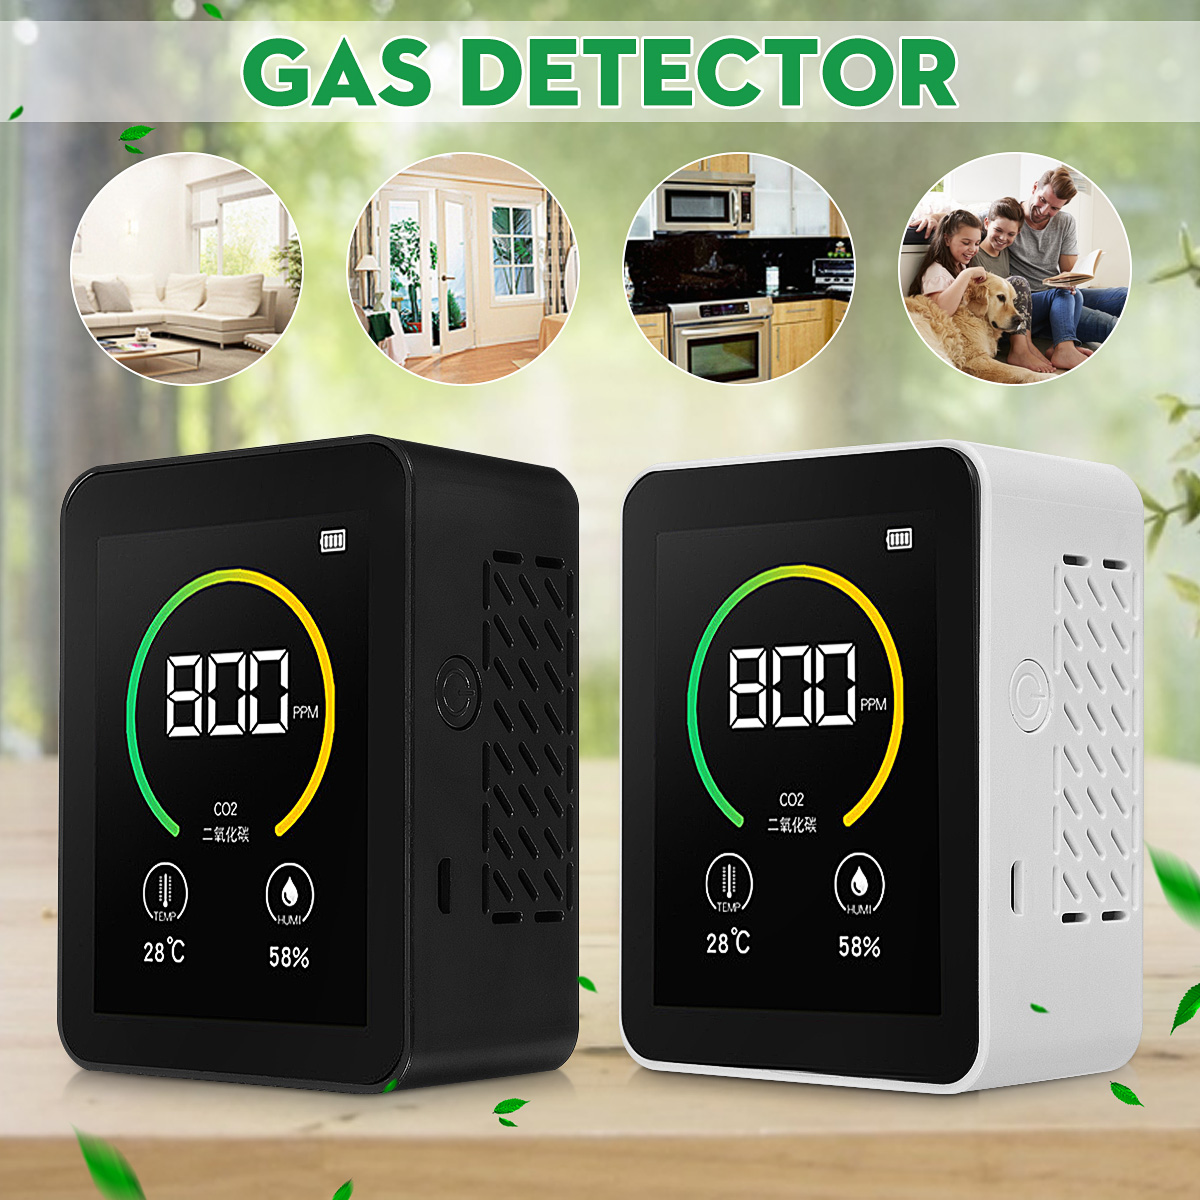 Gas-Co2-Sensor-Detector-Air-Quality-Monitor-Analyzer-W-Temperature-Humidity-Display-1822374-1